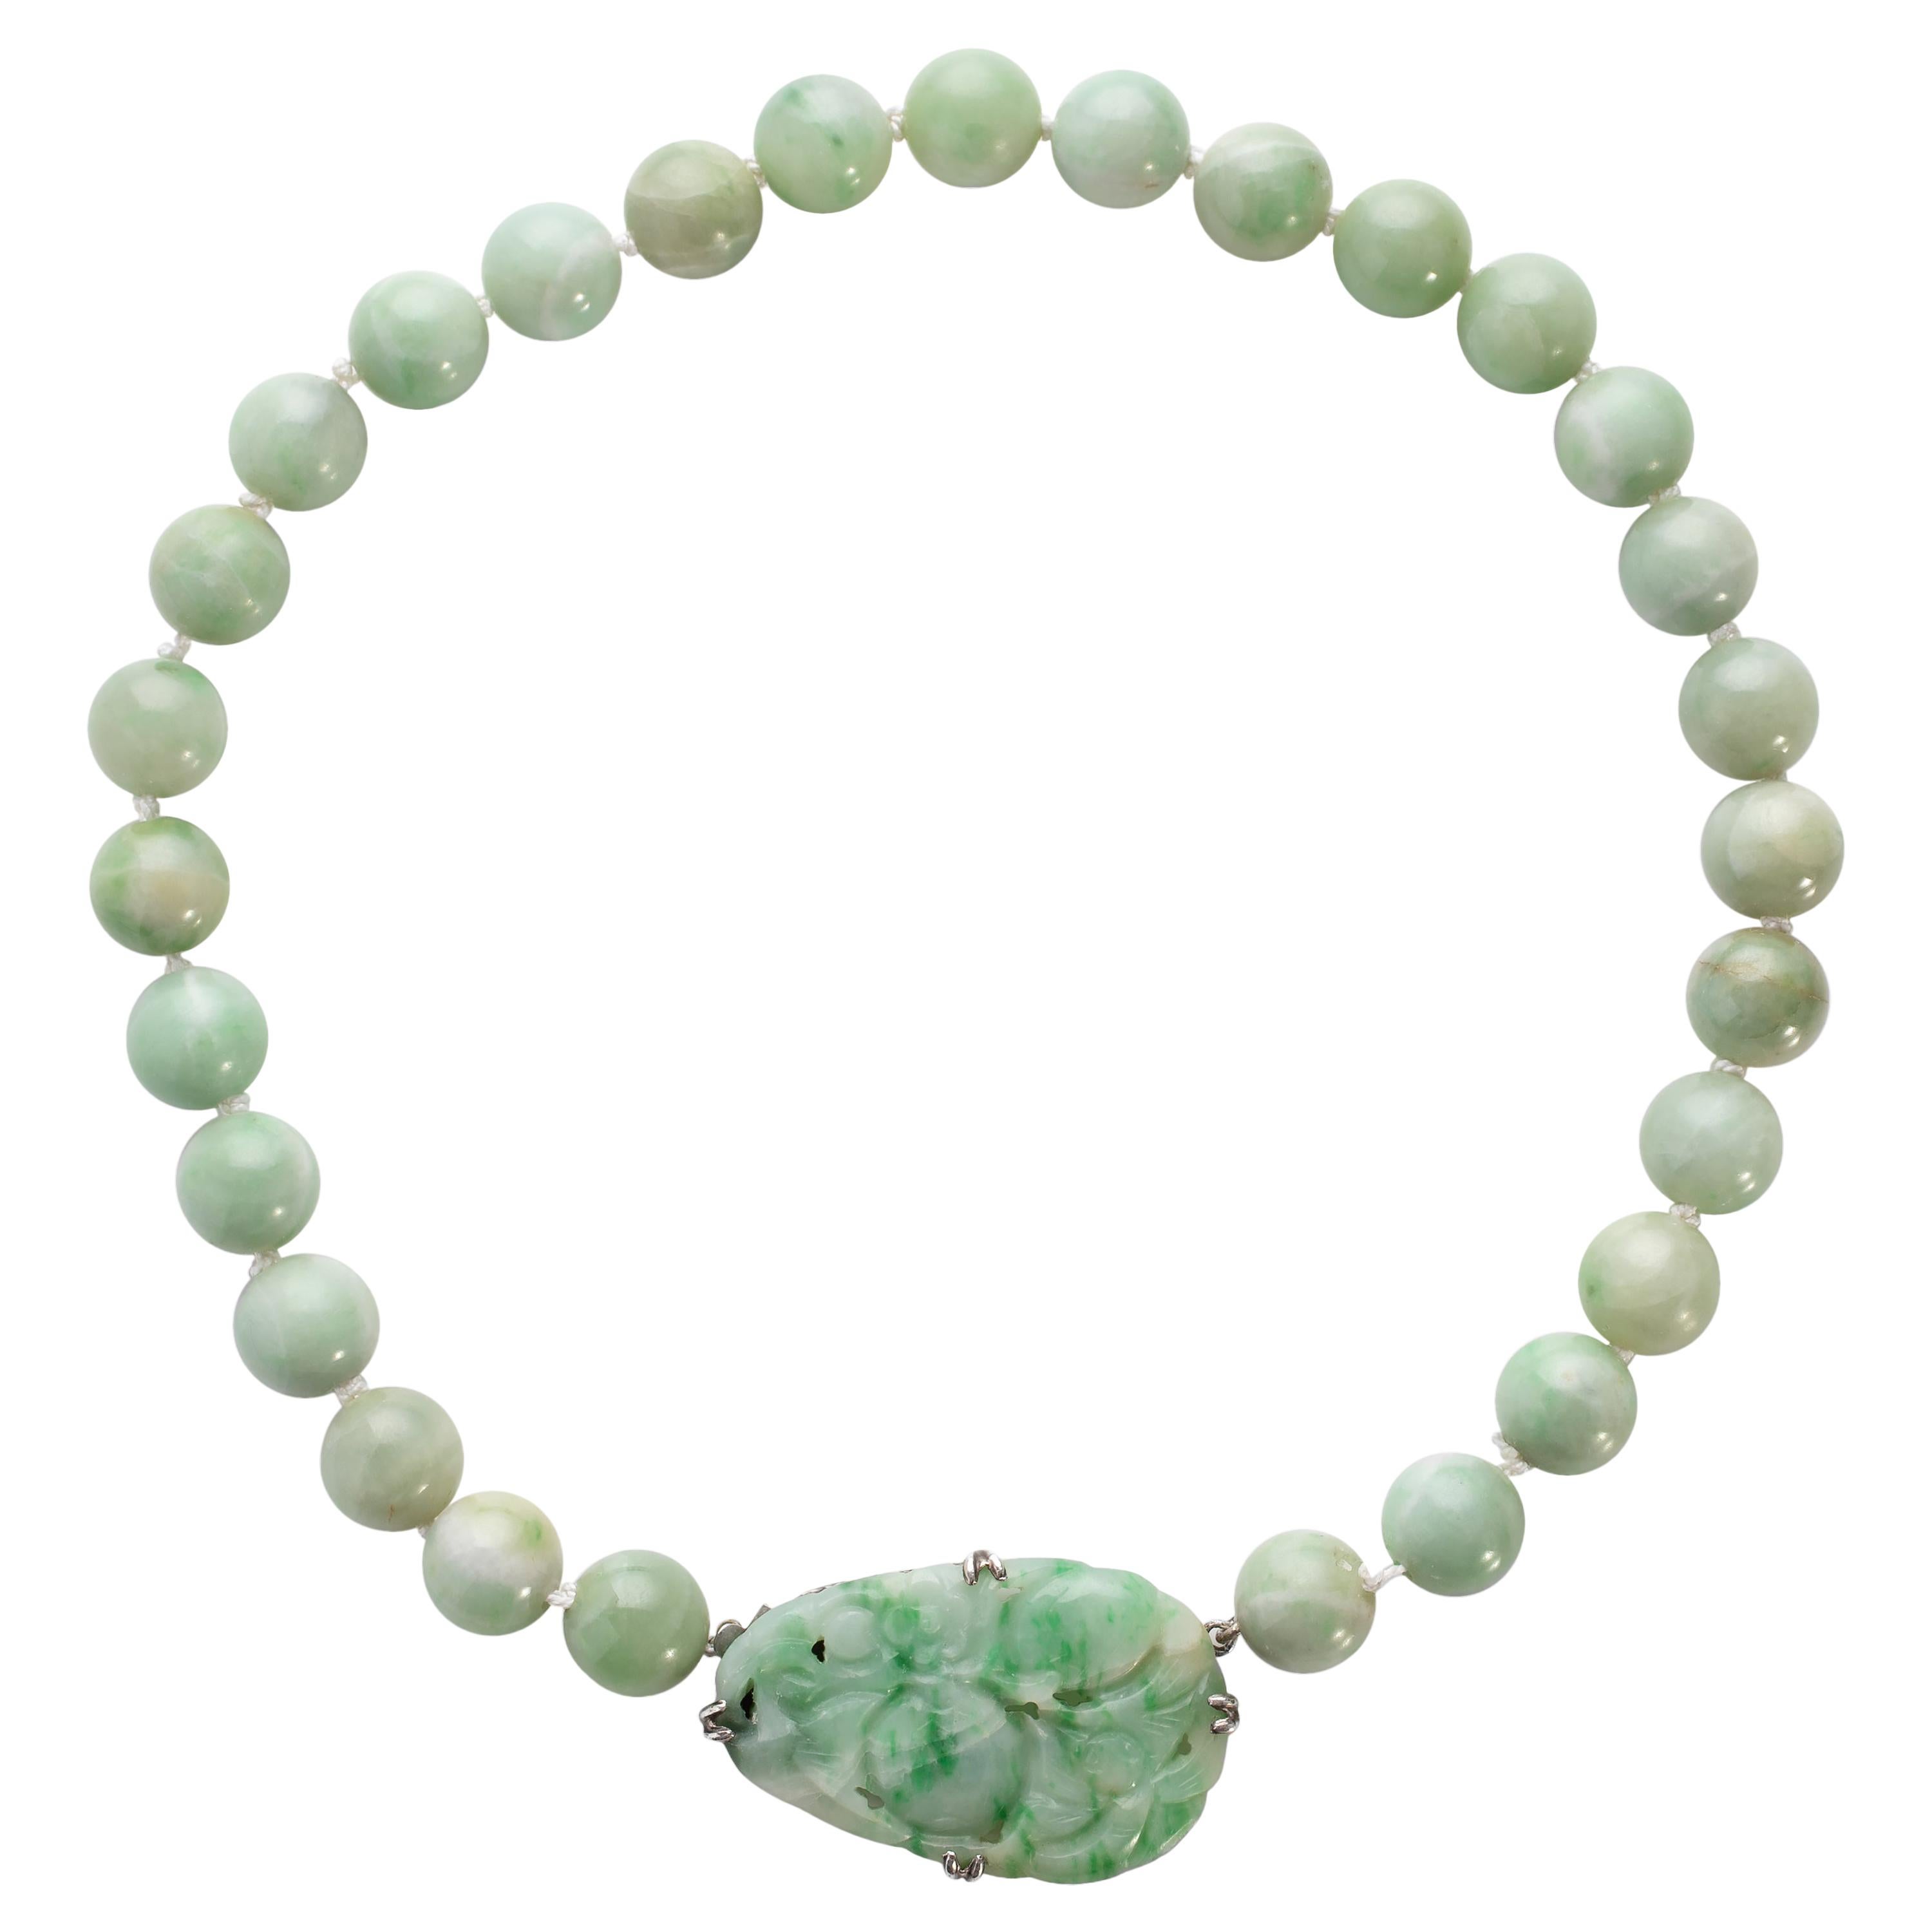 Art Deco Jadeite Jade Necklace with Carved Clasp Certified Untreated